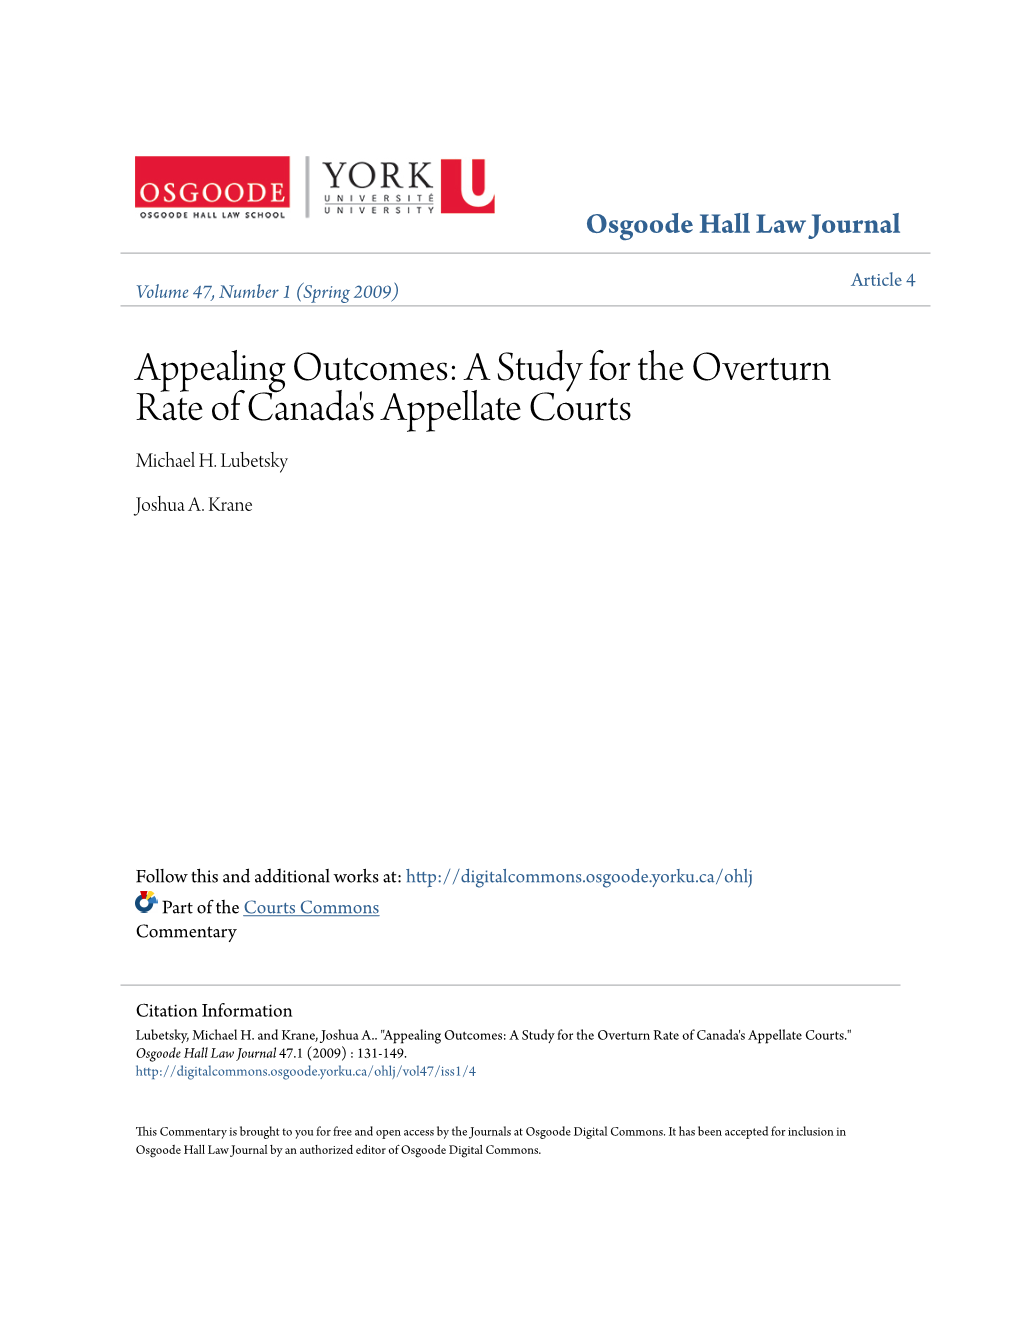 A Study for the Overturn Rate of Canada's Appellate Courts Michael H